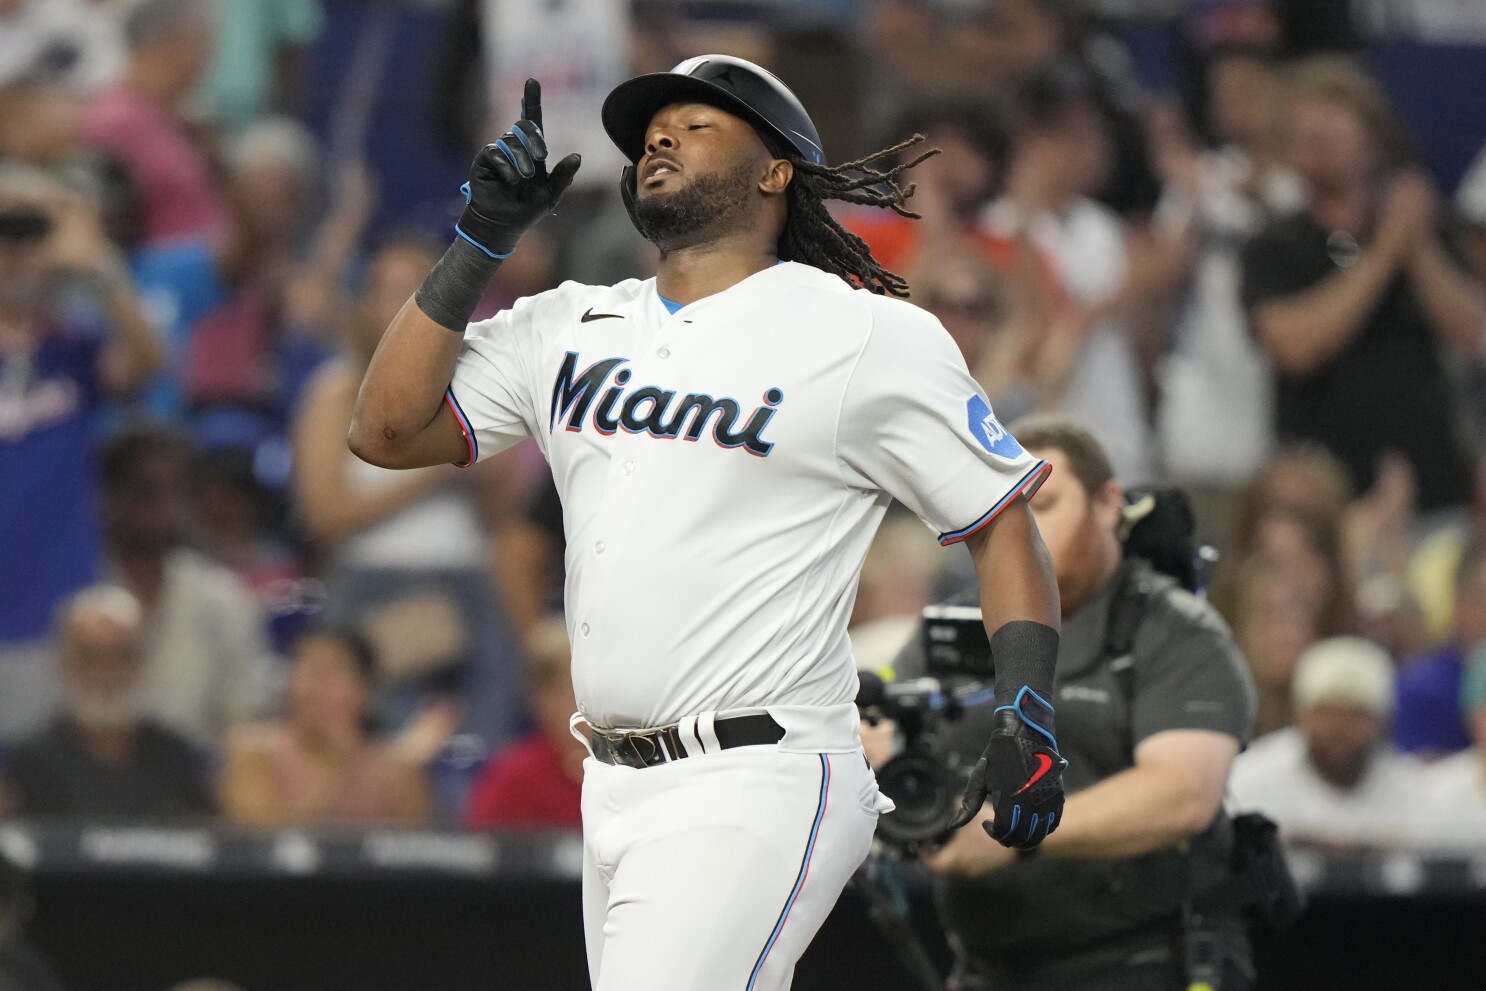 Berti homers twice in 6-1 win as Marlins prevent Brewers from clinching NL  Central